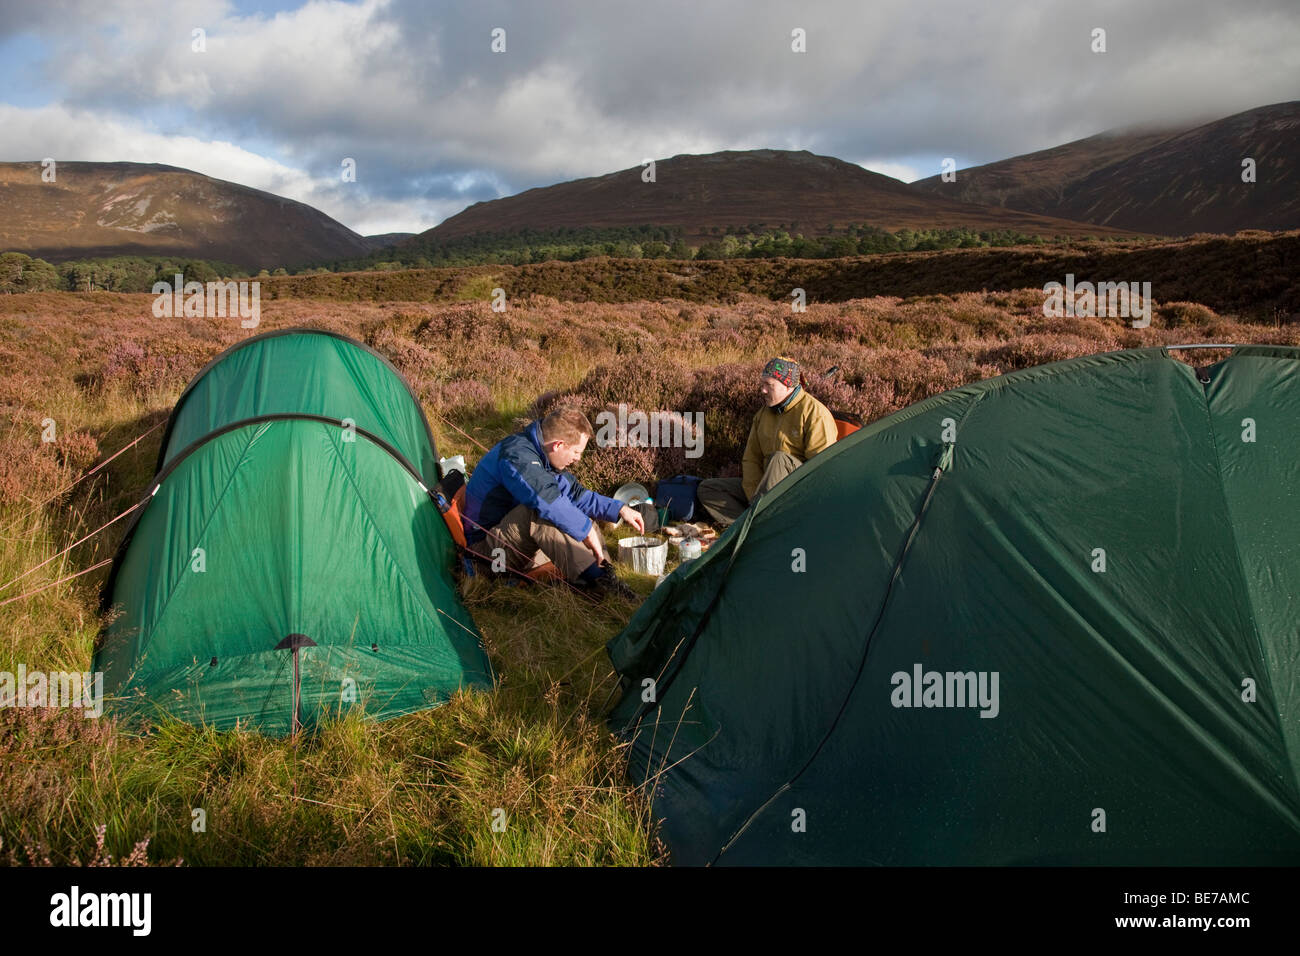 Two men preparing to cook outside their tents among the heather in the Cairngorm mountains, Scotland Stock Photo